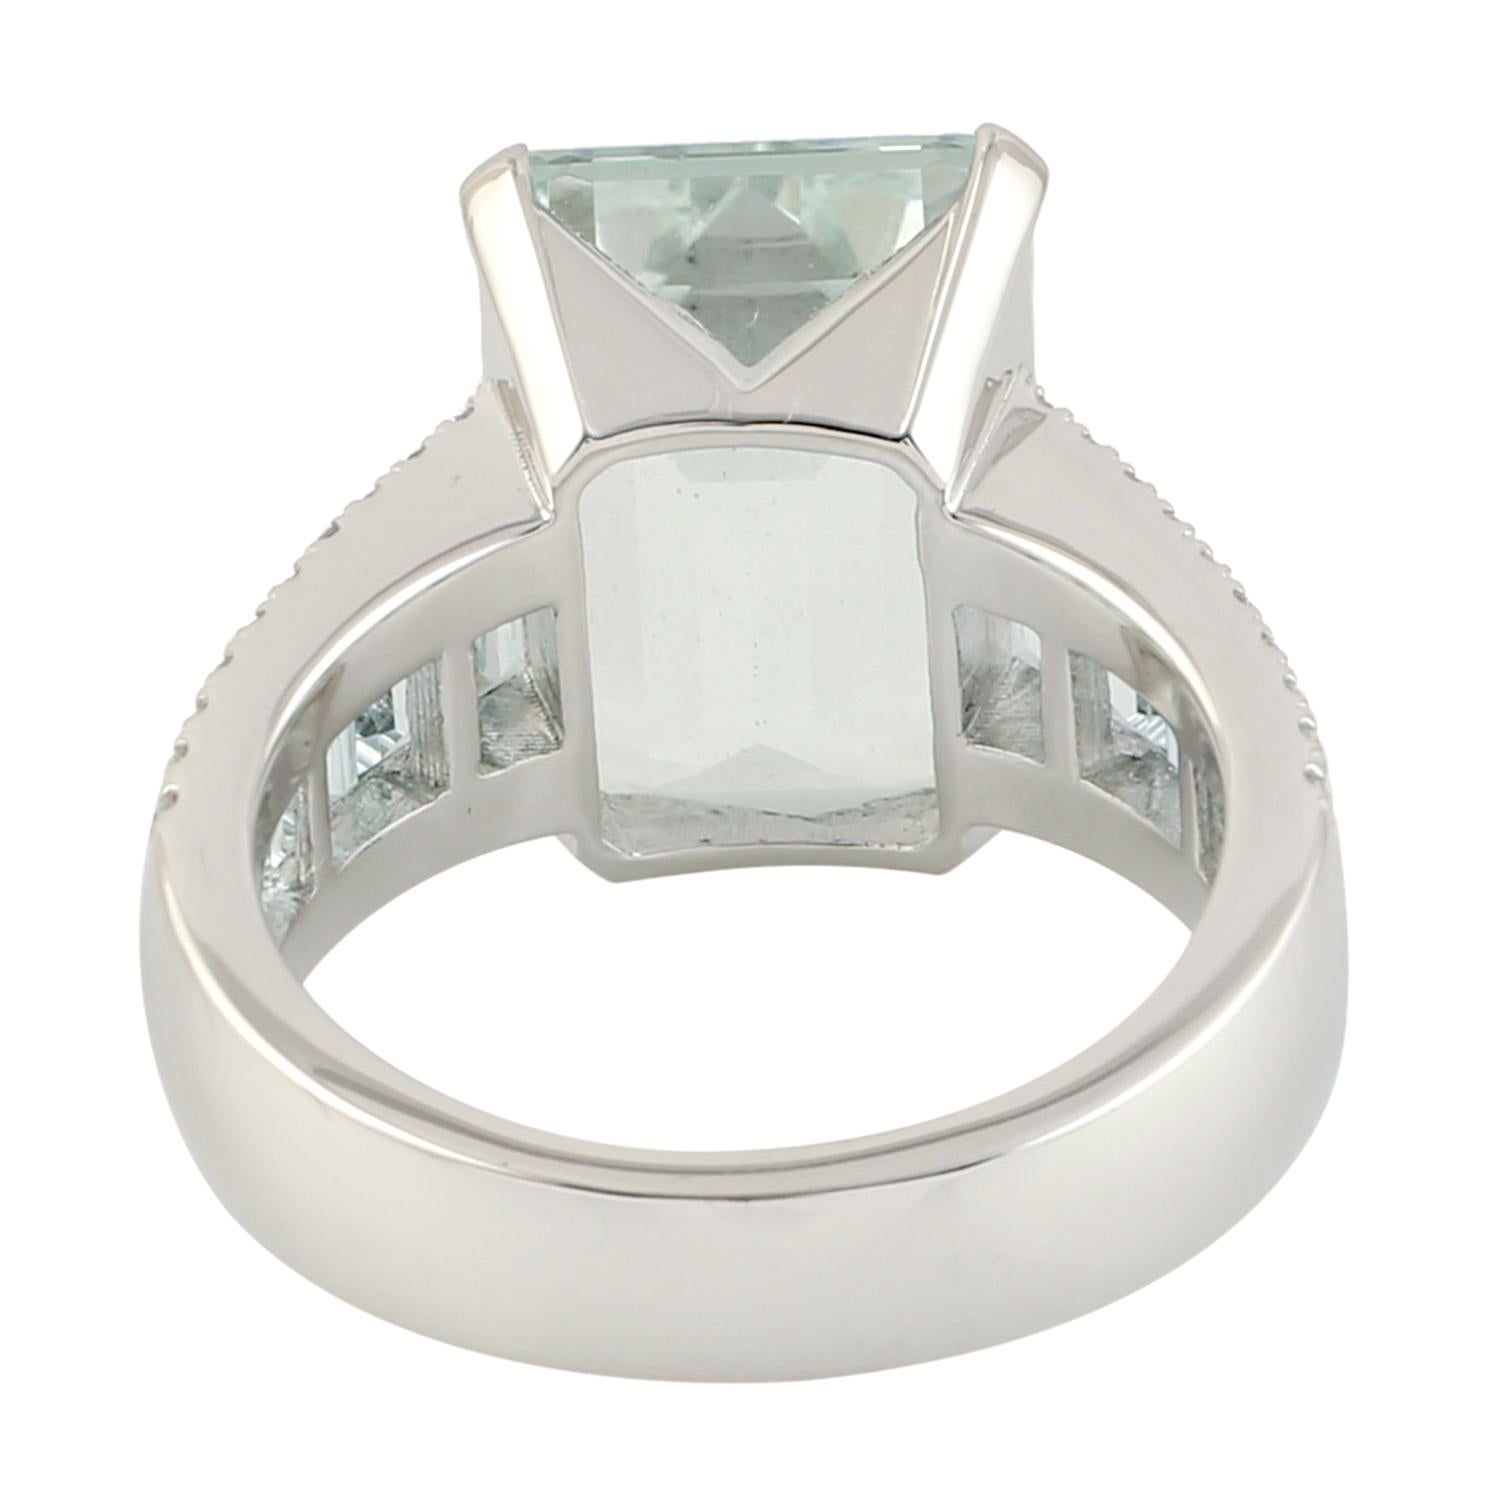 Art Nouveau Emerald Cut Aquamarine Baguette Ring With Diamonds Made in 18k White Gold For Sale